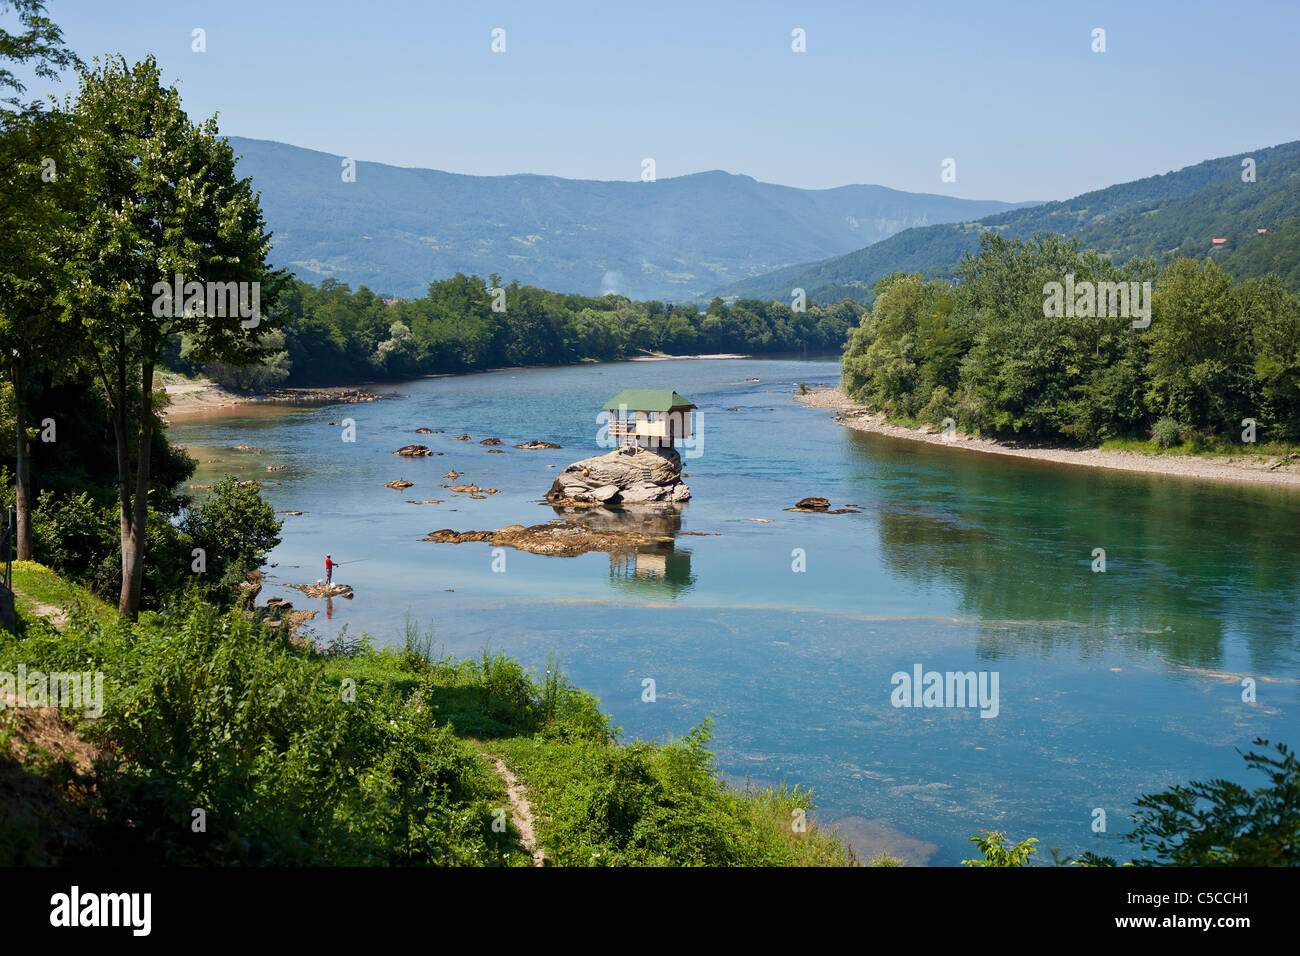 River Drina, Serbia, small house on water Stock Photo